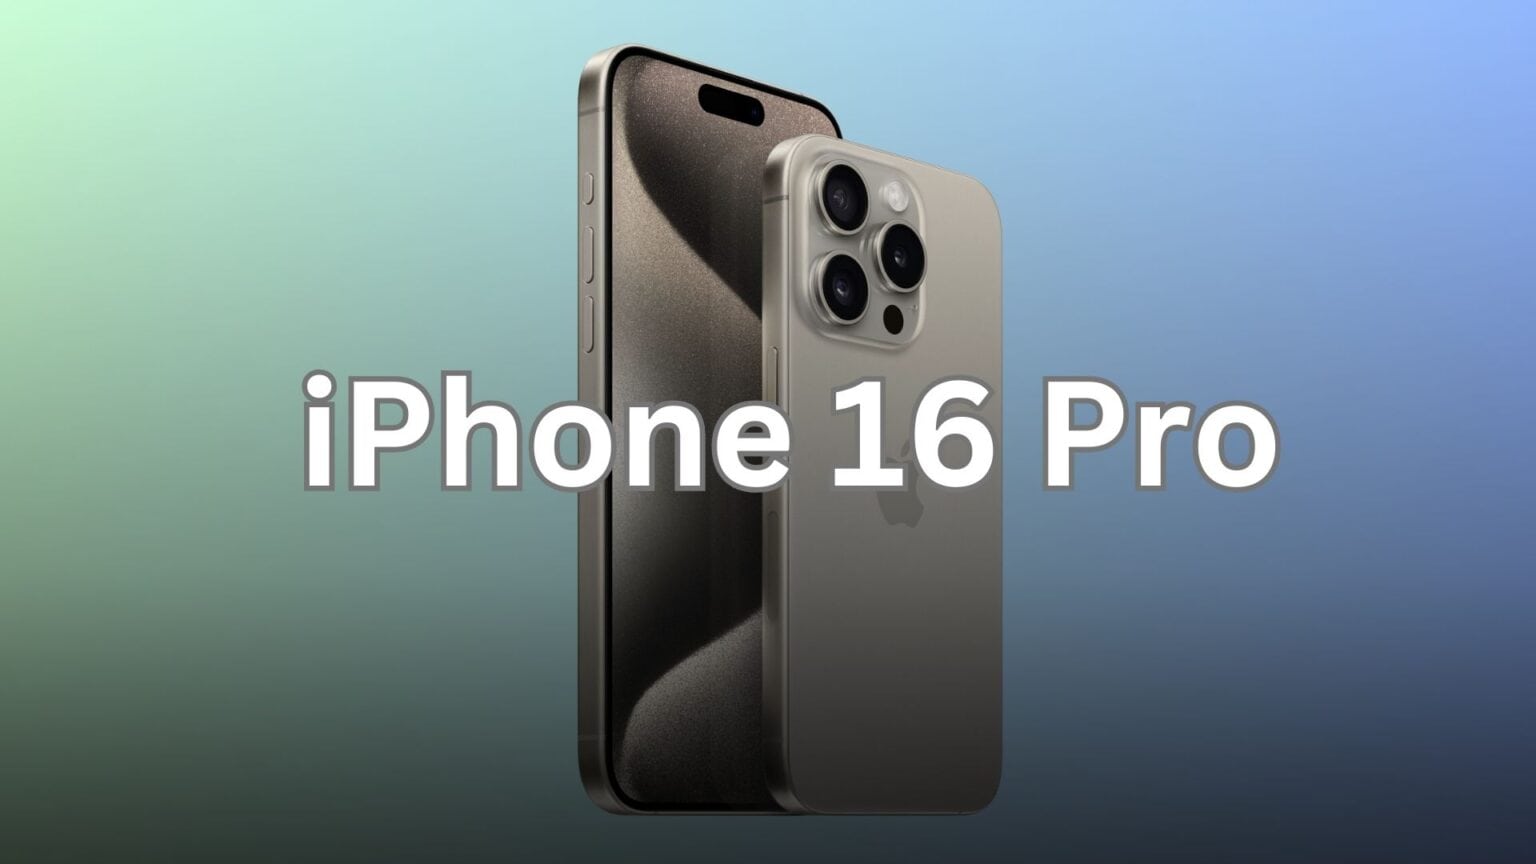 iPhone 16 Pro rendered image